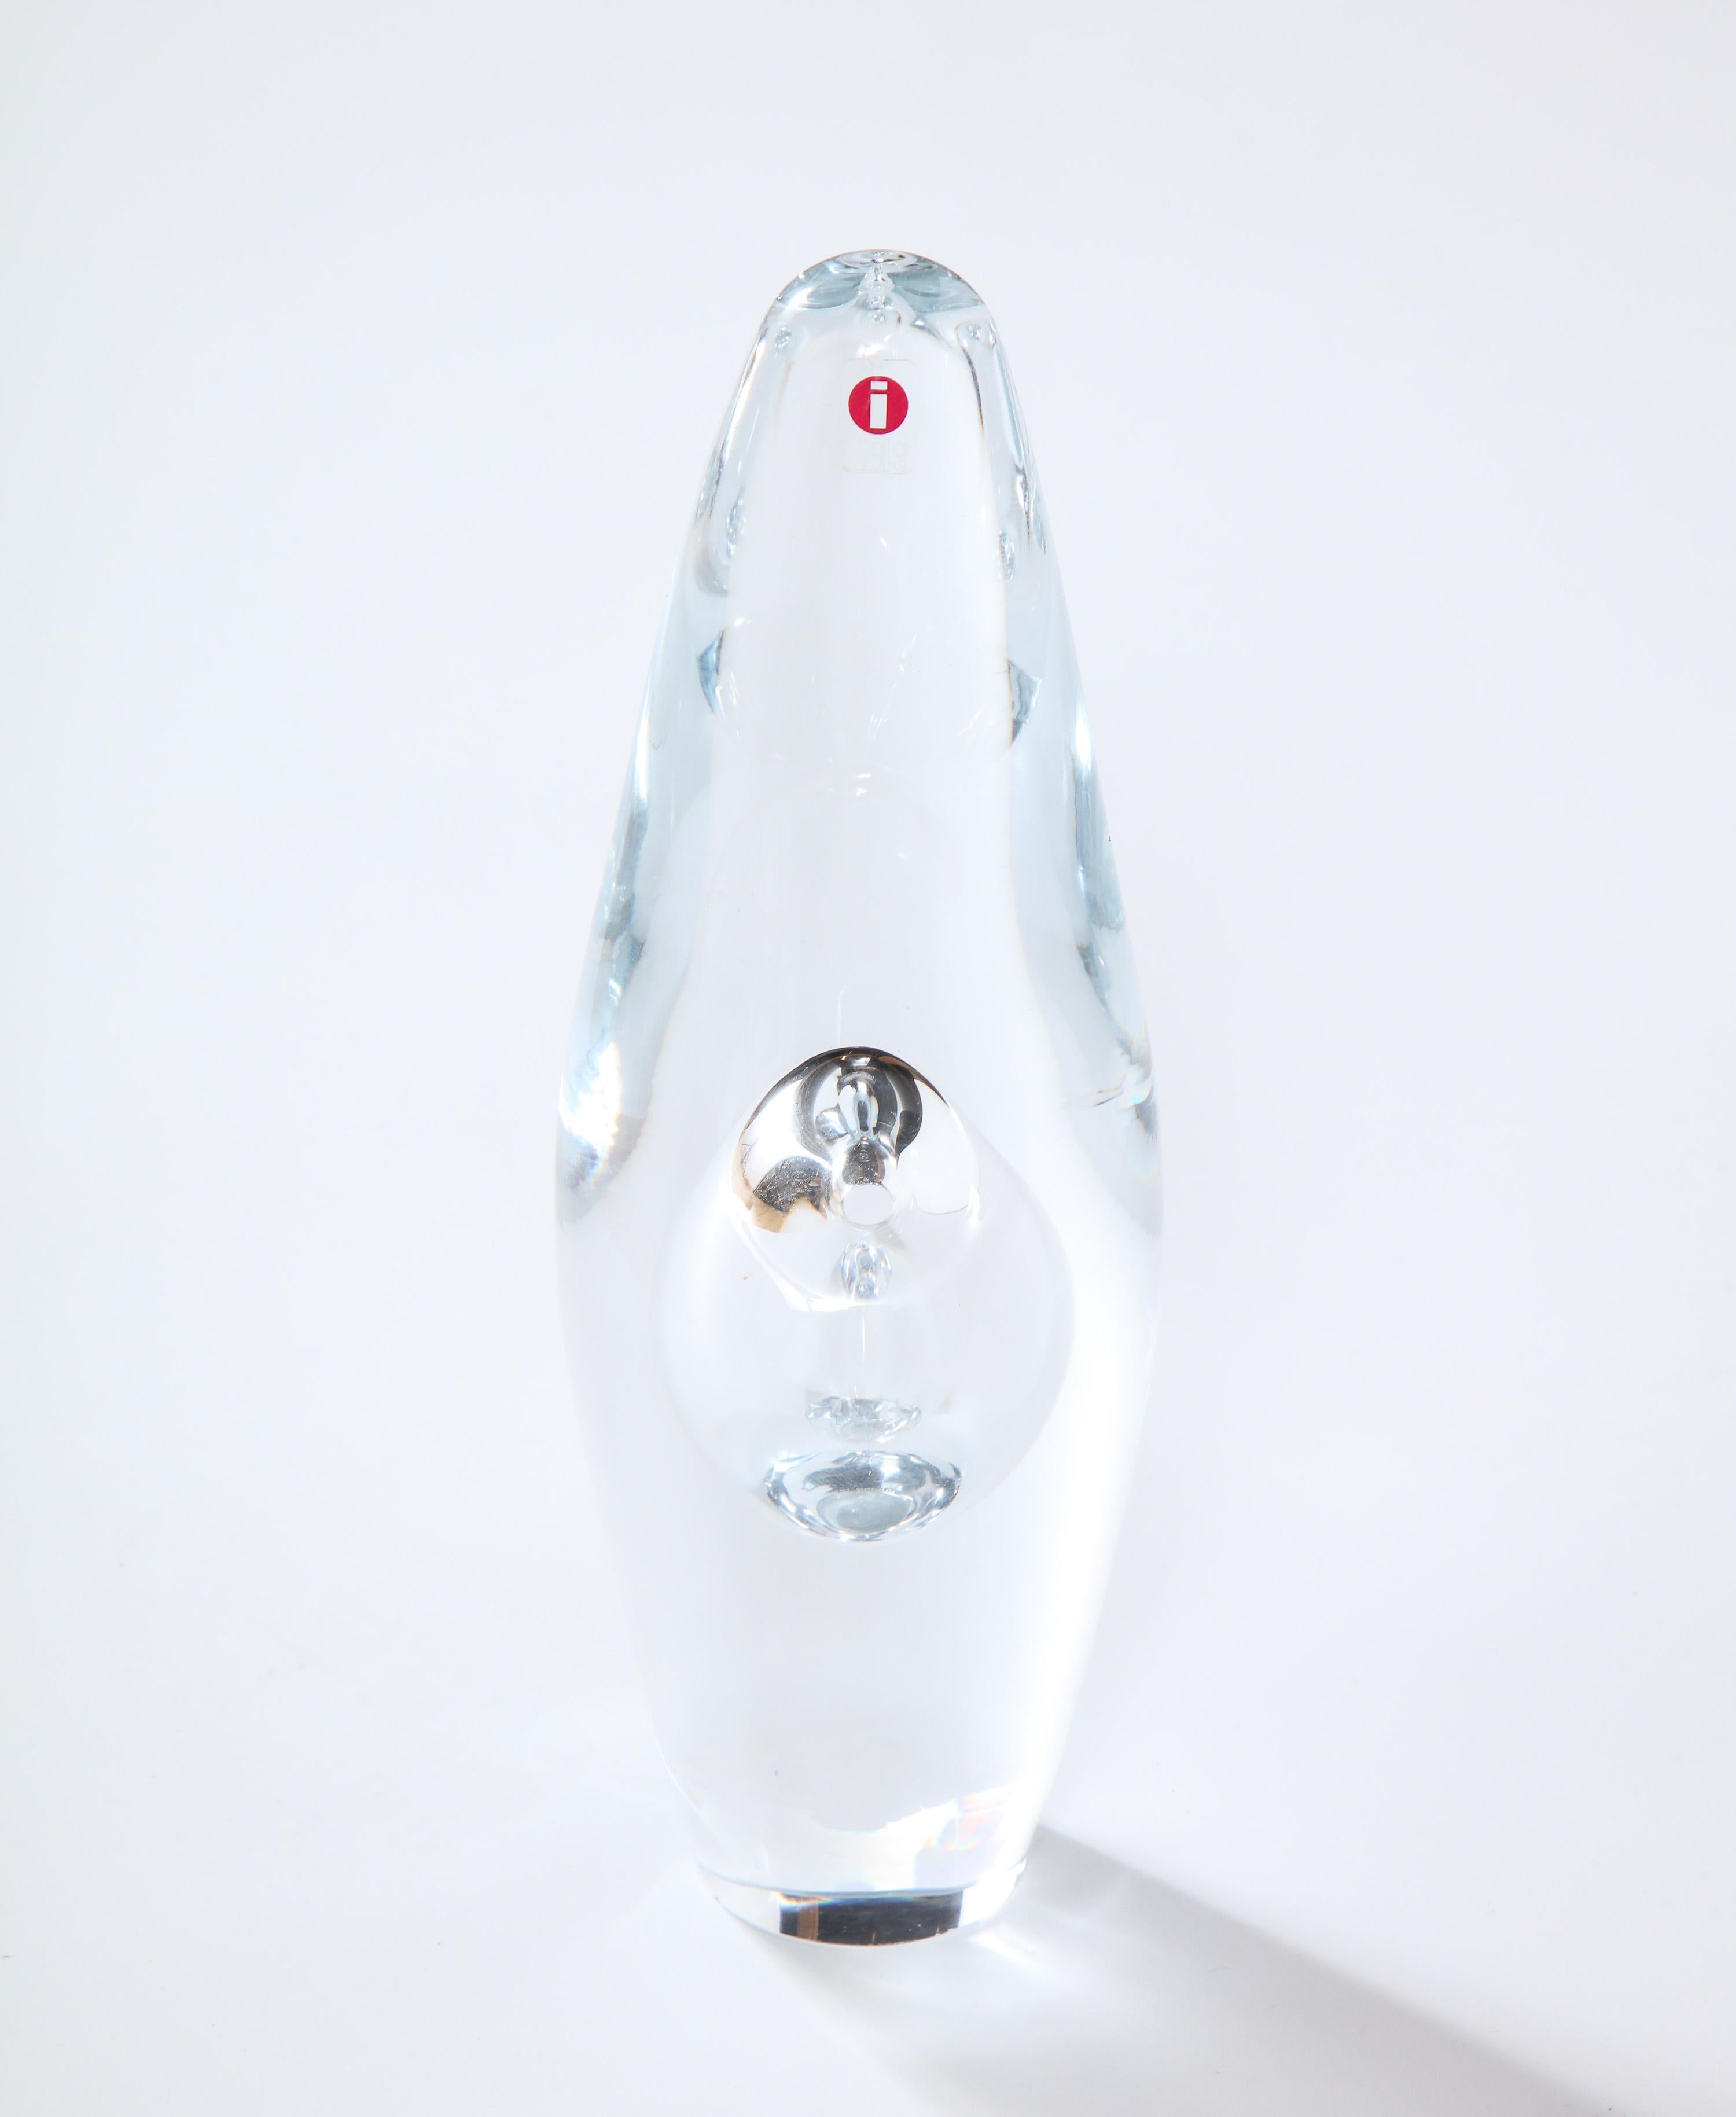 Decorative crystal glass vase by Ittala, Finland. The vase is called the orchid and was designed by Timo Sarpaneva, circa 1950. This vase was produced circa 2000.